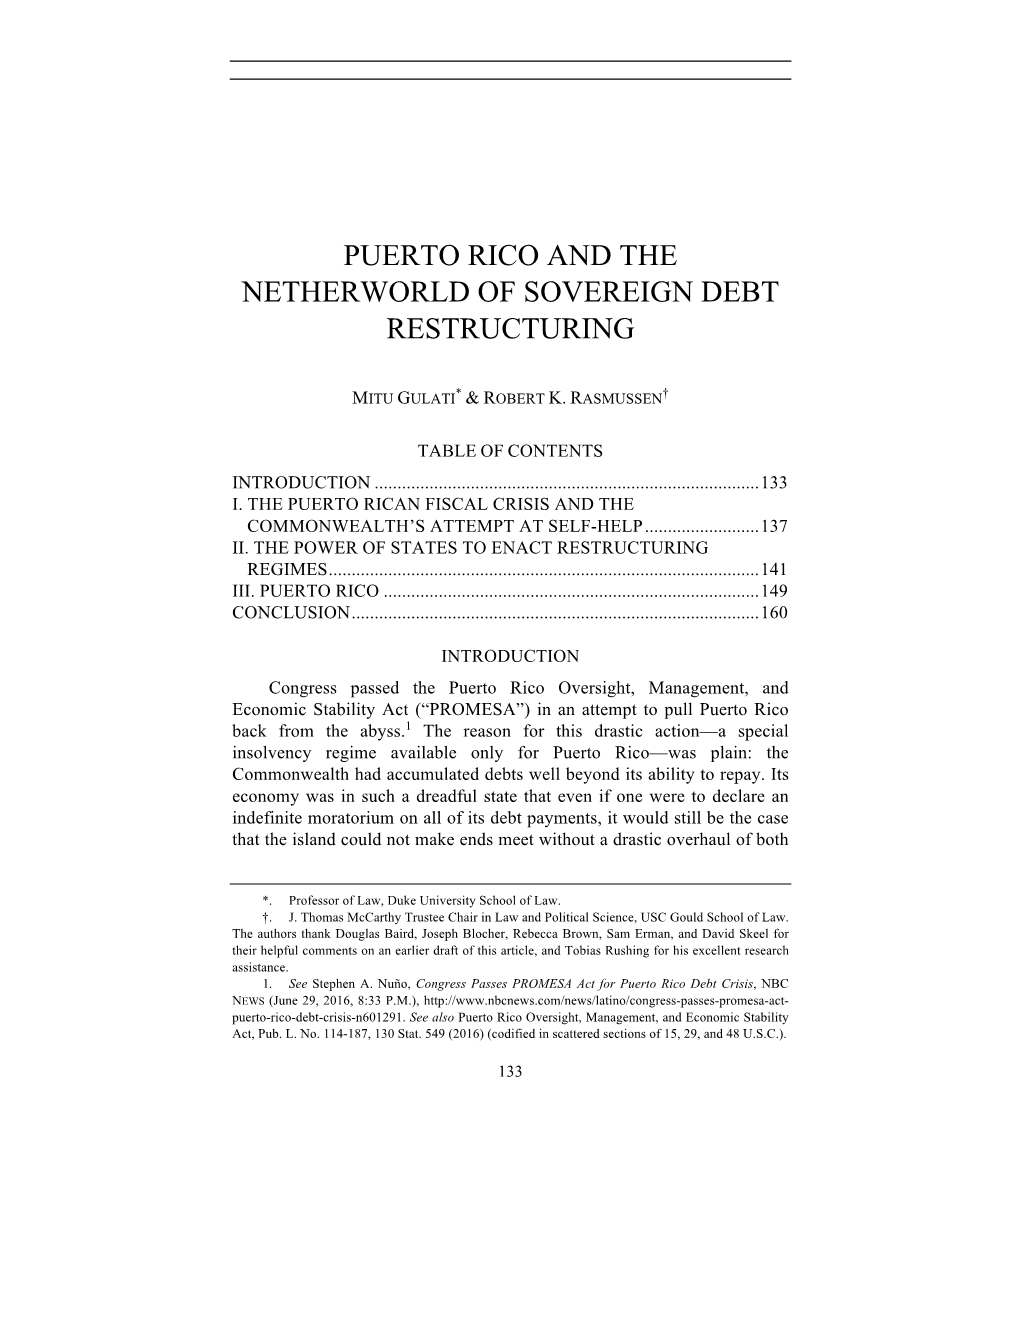 Puerto Rico and the Netherworld of Sovereign Debt Restructuring